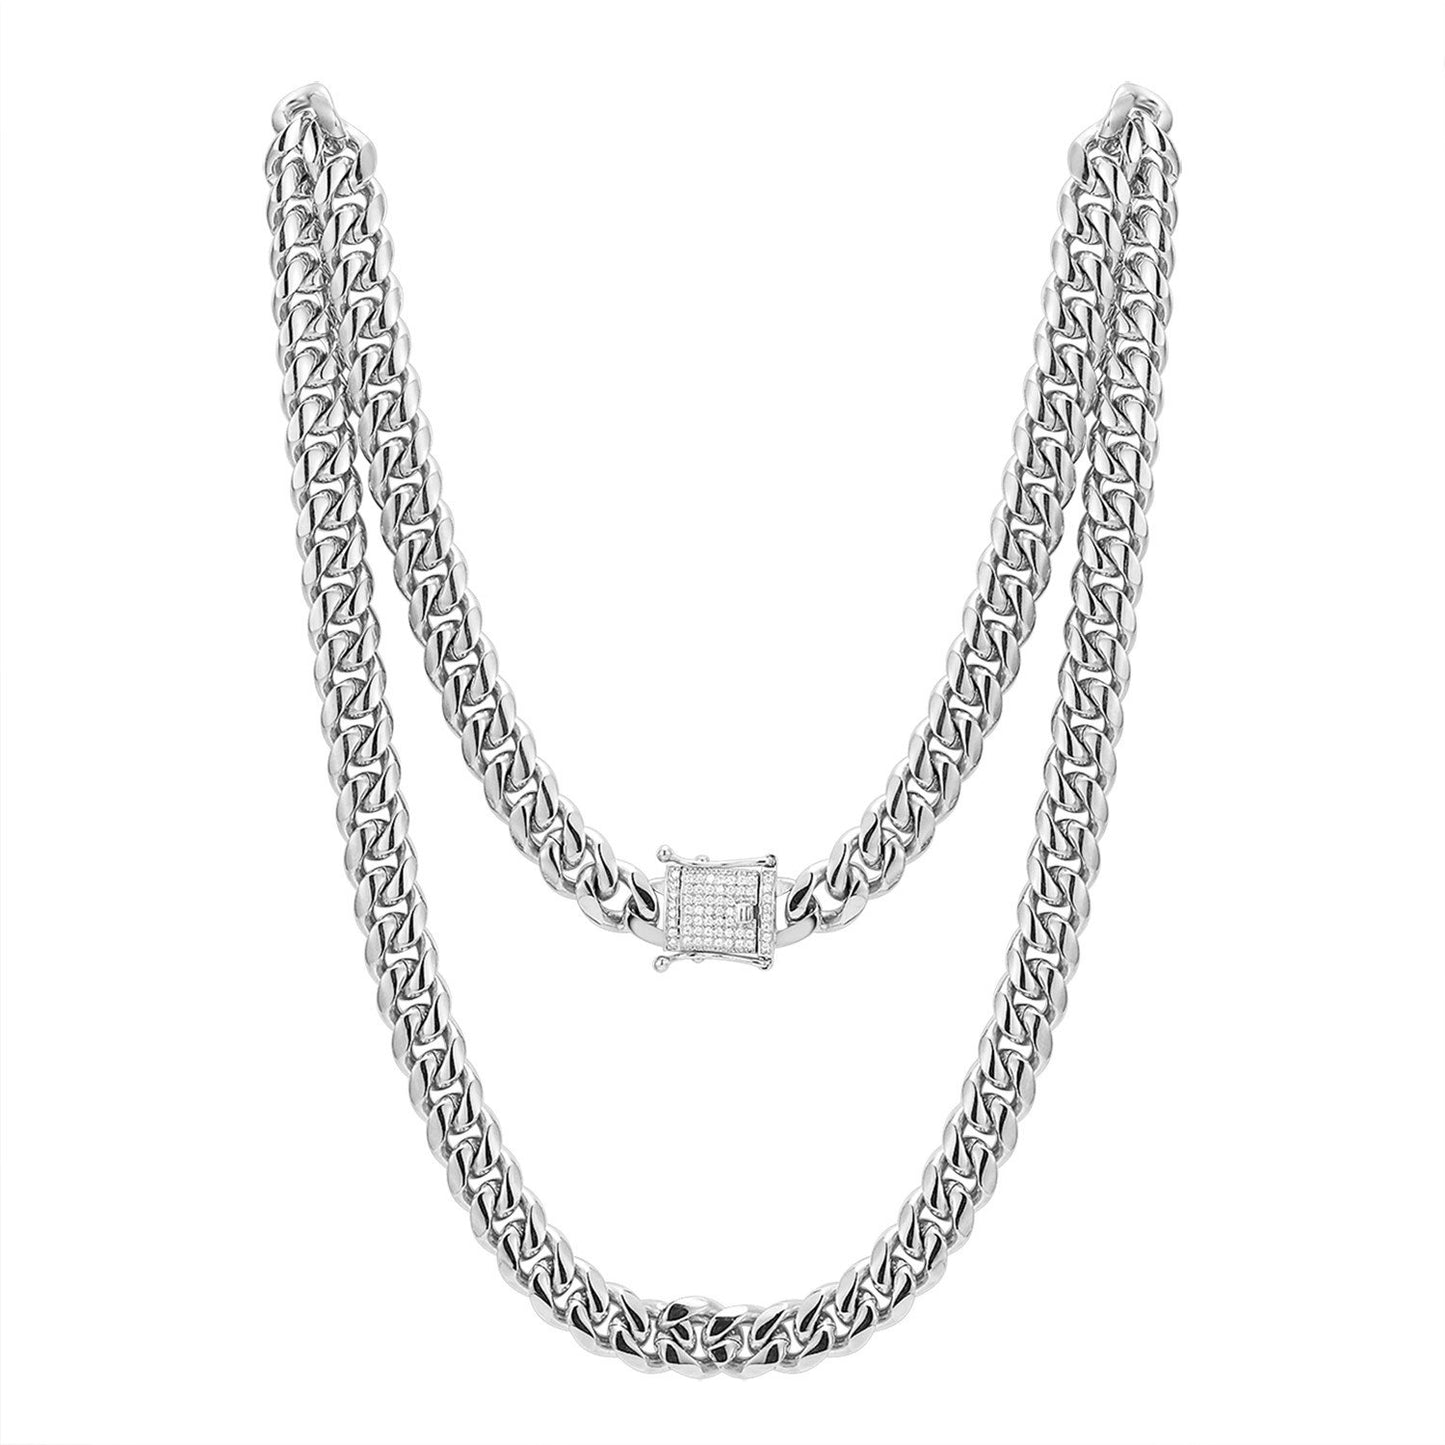 Stainless Steel 12mm Miami Cuban Link 14k White Gold Finish Chain 30" Designer out new Lock